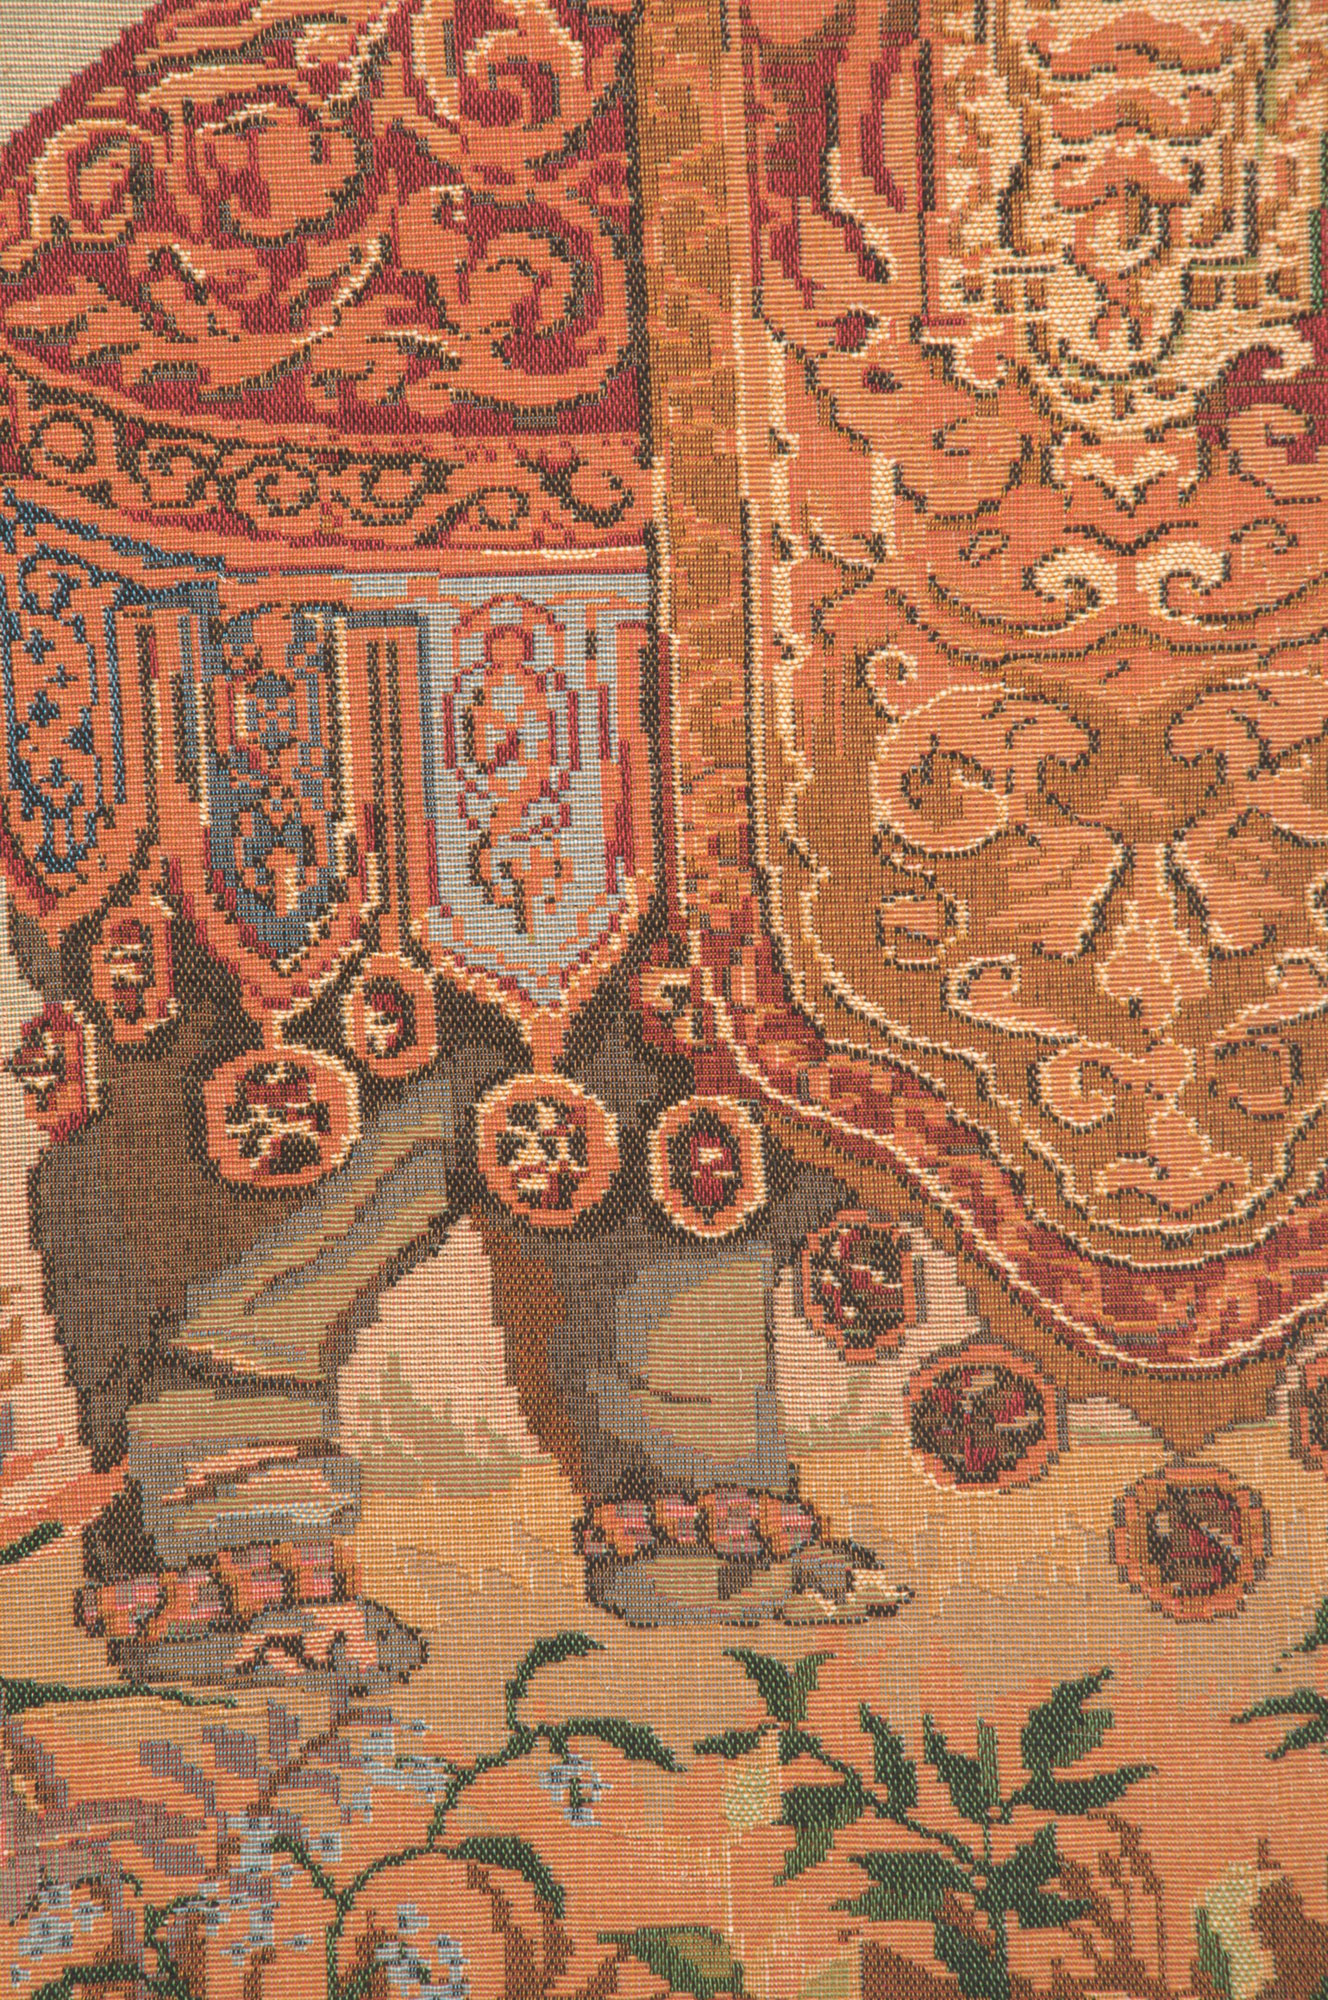 Royal Elephant Large French Tapestry | Close Up 2